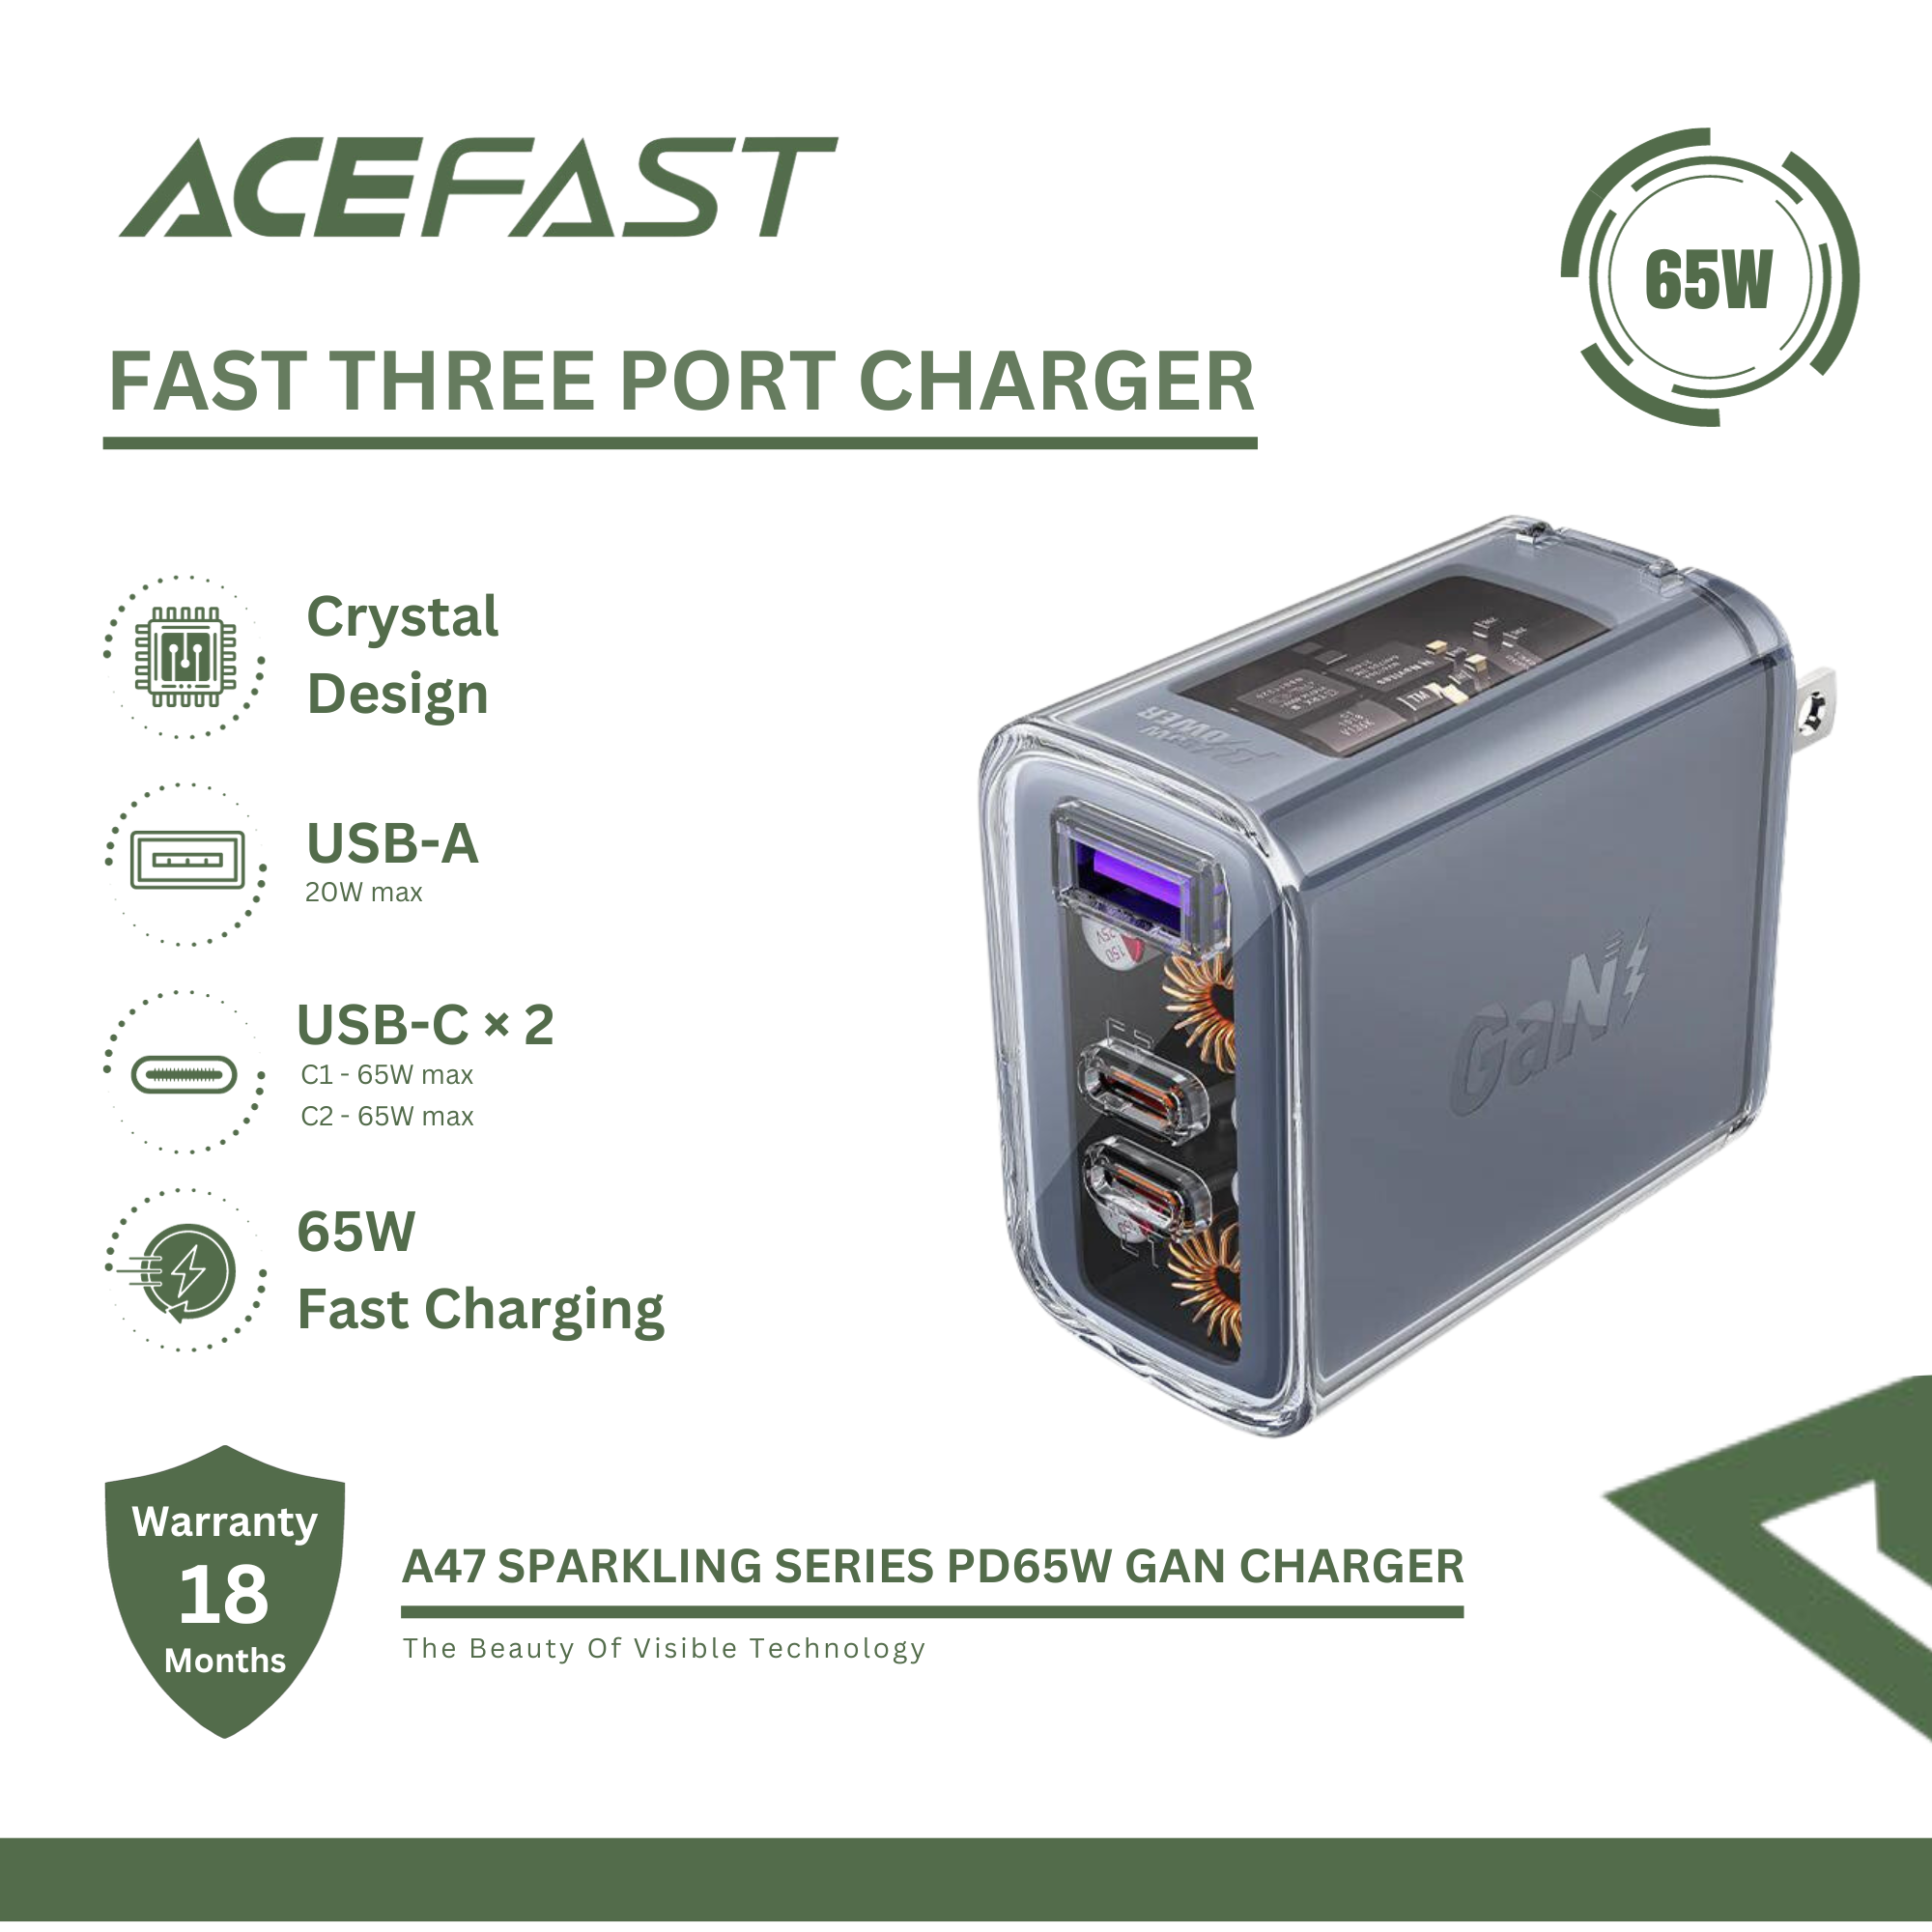 ACEFAST A47 SPARKLING SERIES PD65W GAN (2*USB-C+USB-A) CHARGER - MICA GREY